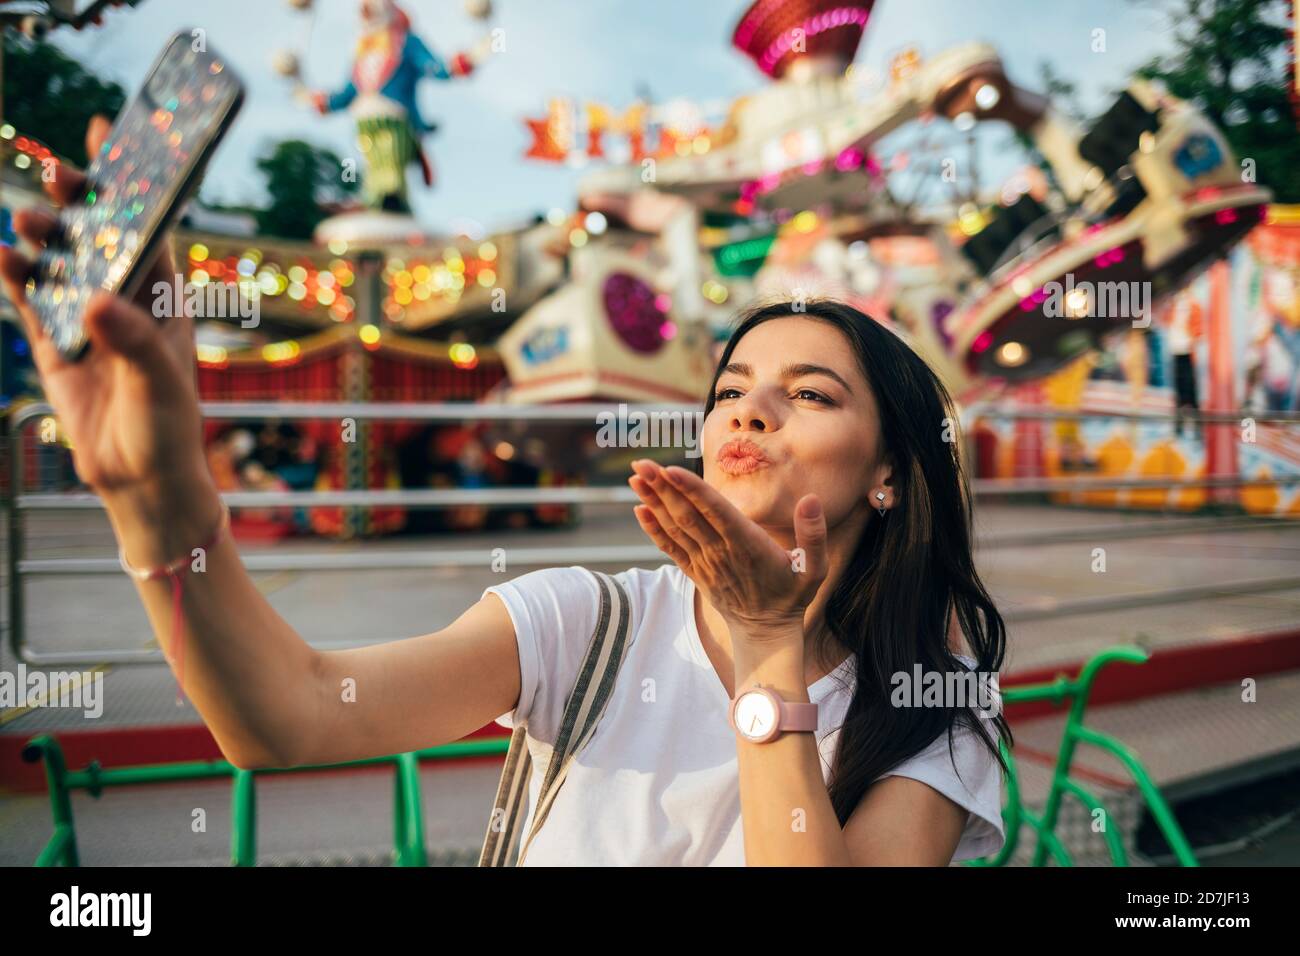 Young woman blowing kiss while taking selfie at amusement park Stock Photo